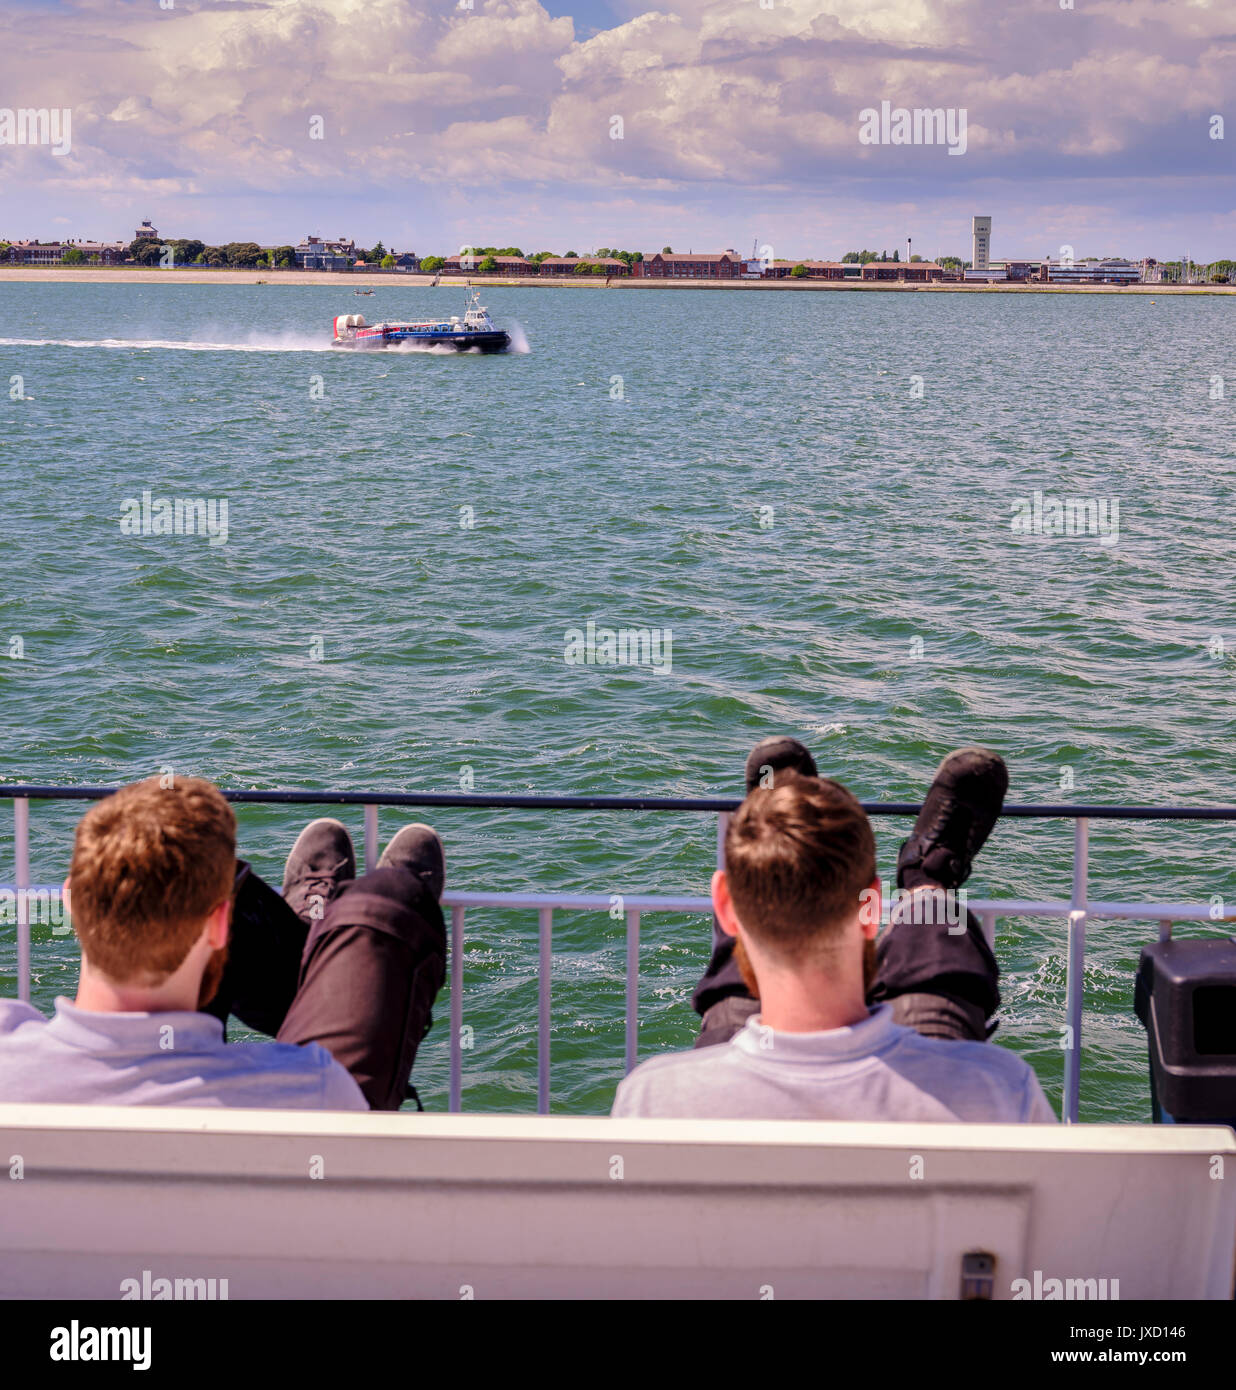 The Portsmouth to Isle of Wight Hovercraft on its crossing between the mainland and the island wathced by passenger on a ferry. Stock Photo